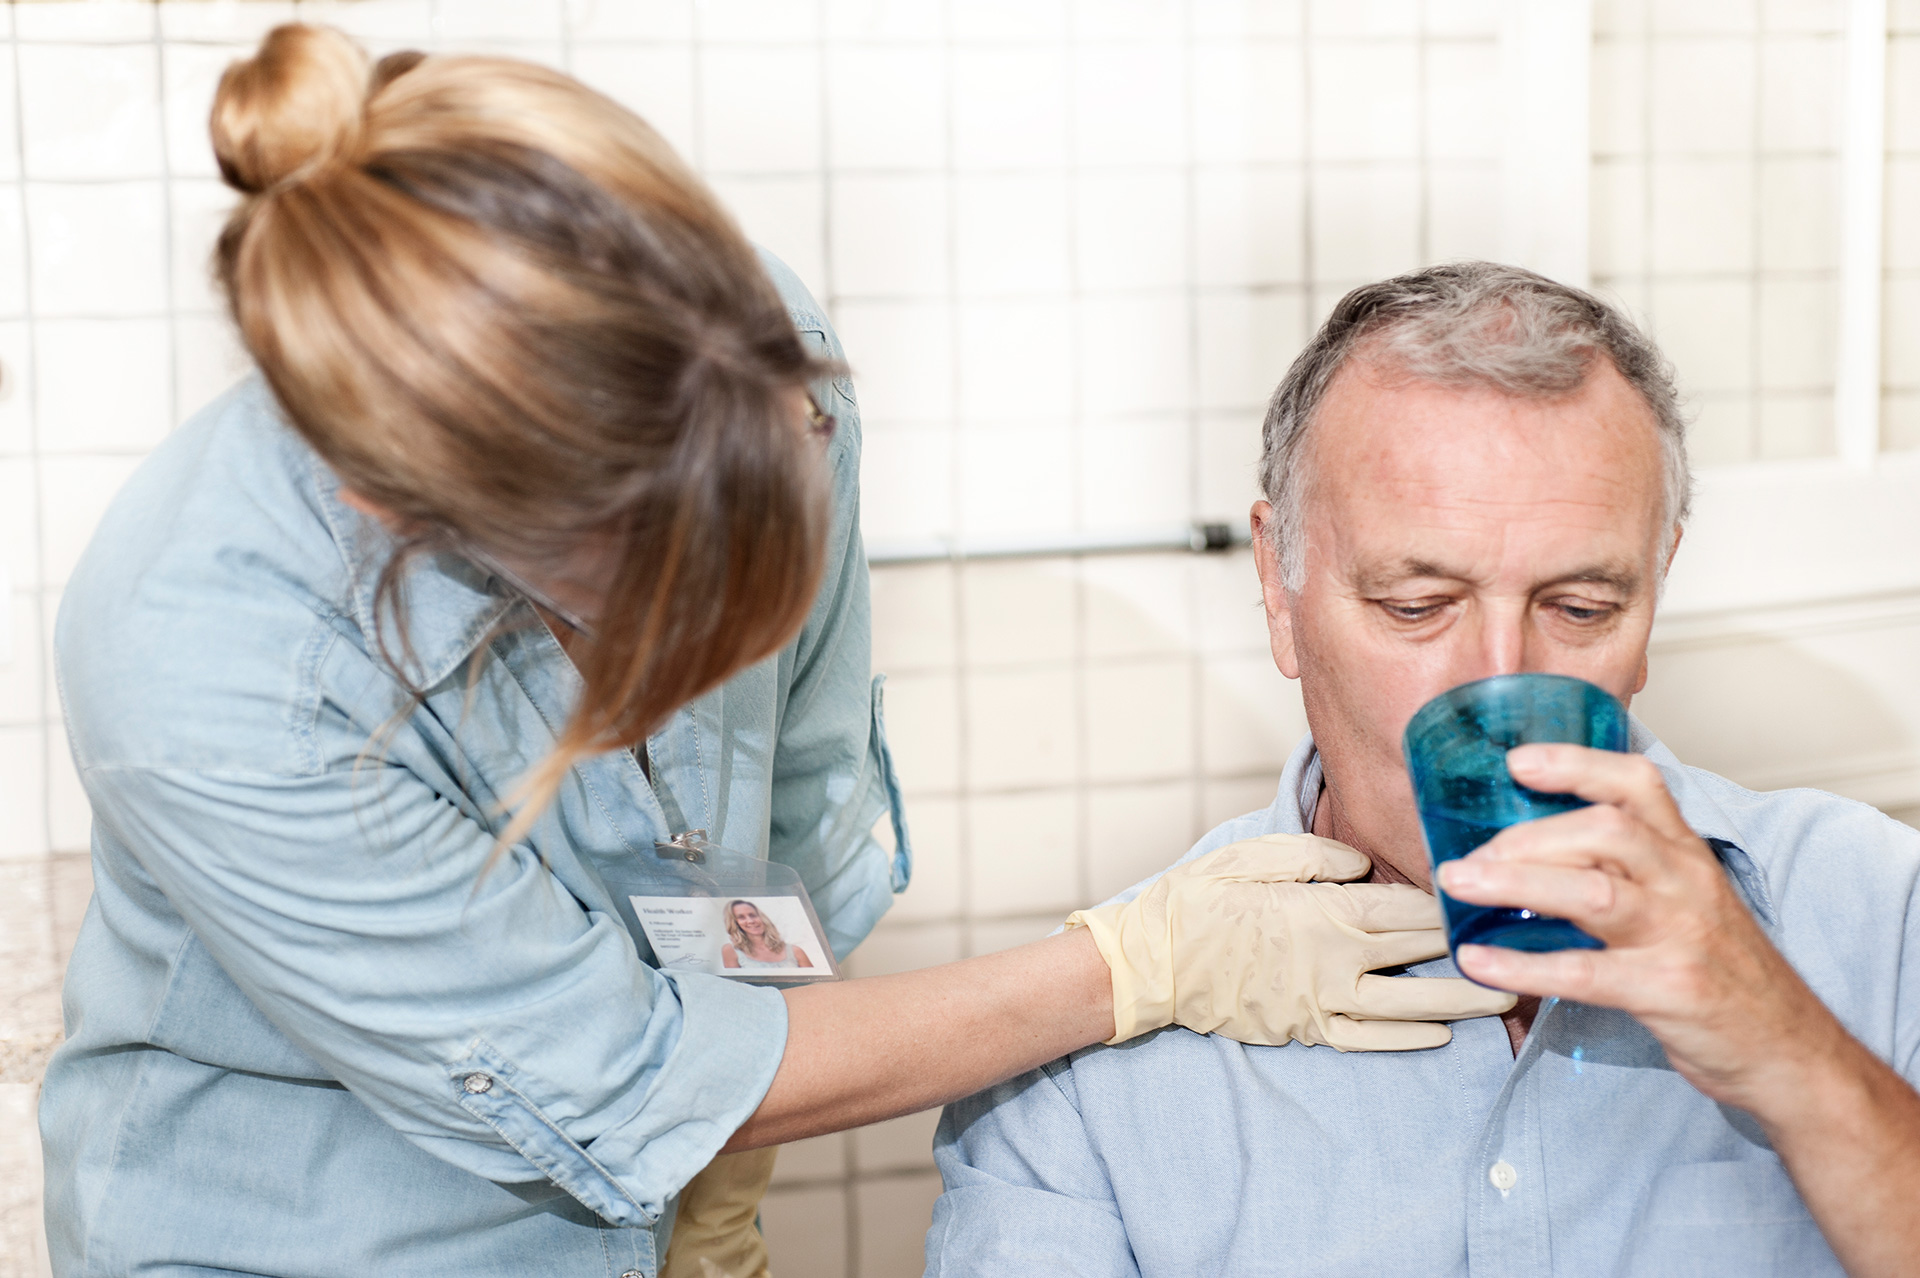 Nurse assisting patient drinking water